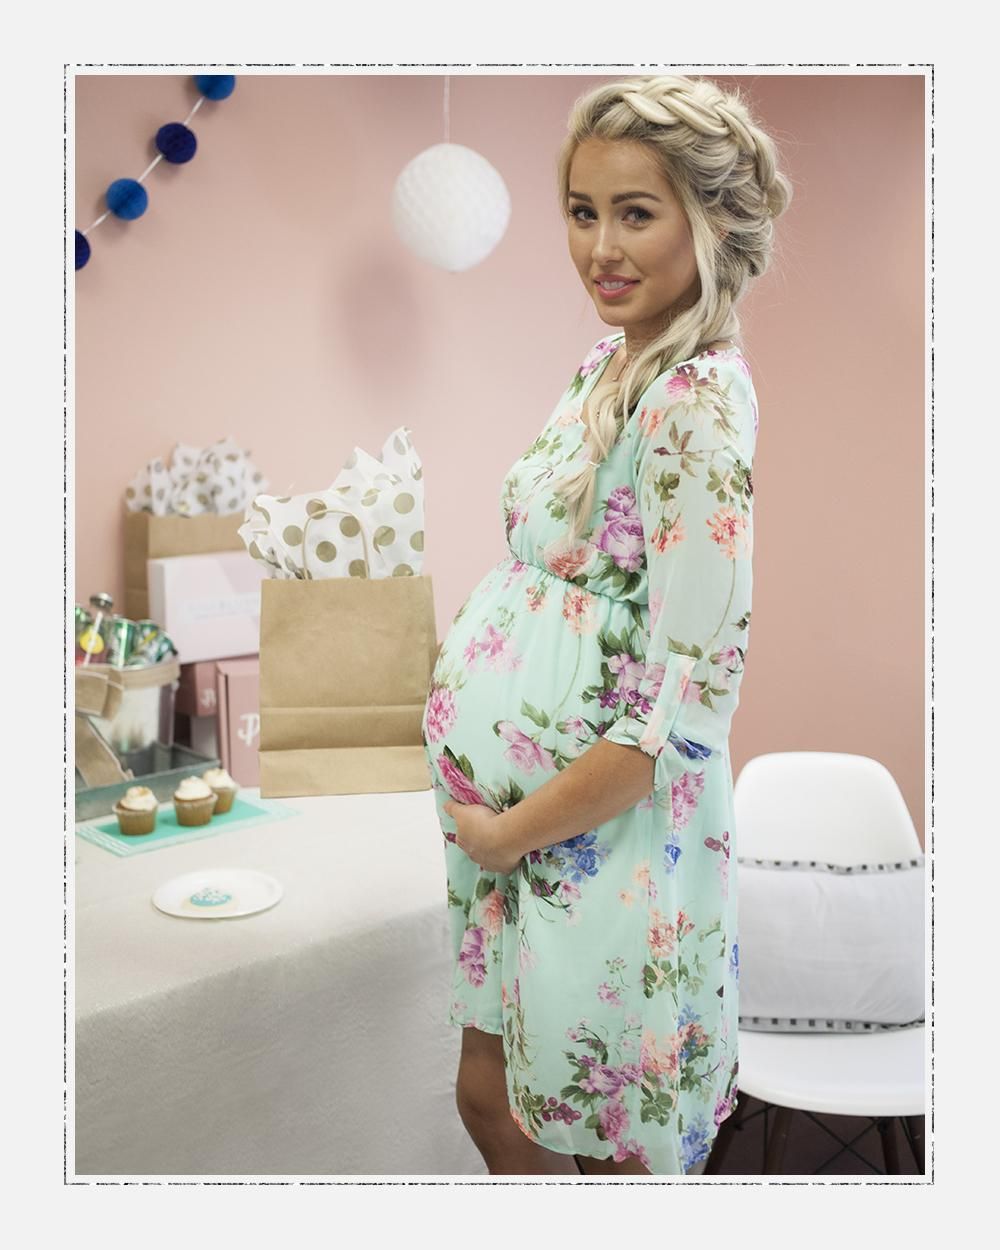 Full Size of Baby Shower:baby Shower Dresses Trendy Affordable Maternity Clothes Inexpensive Maternity Clothes Maternity Dresses For Photoshoot Maternity Gown Style Maternity Stores Near Me Plus Size Maternity Clothes Cheap Maternity Jeans